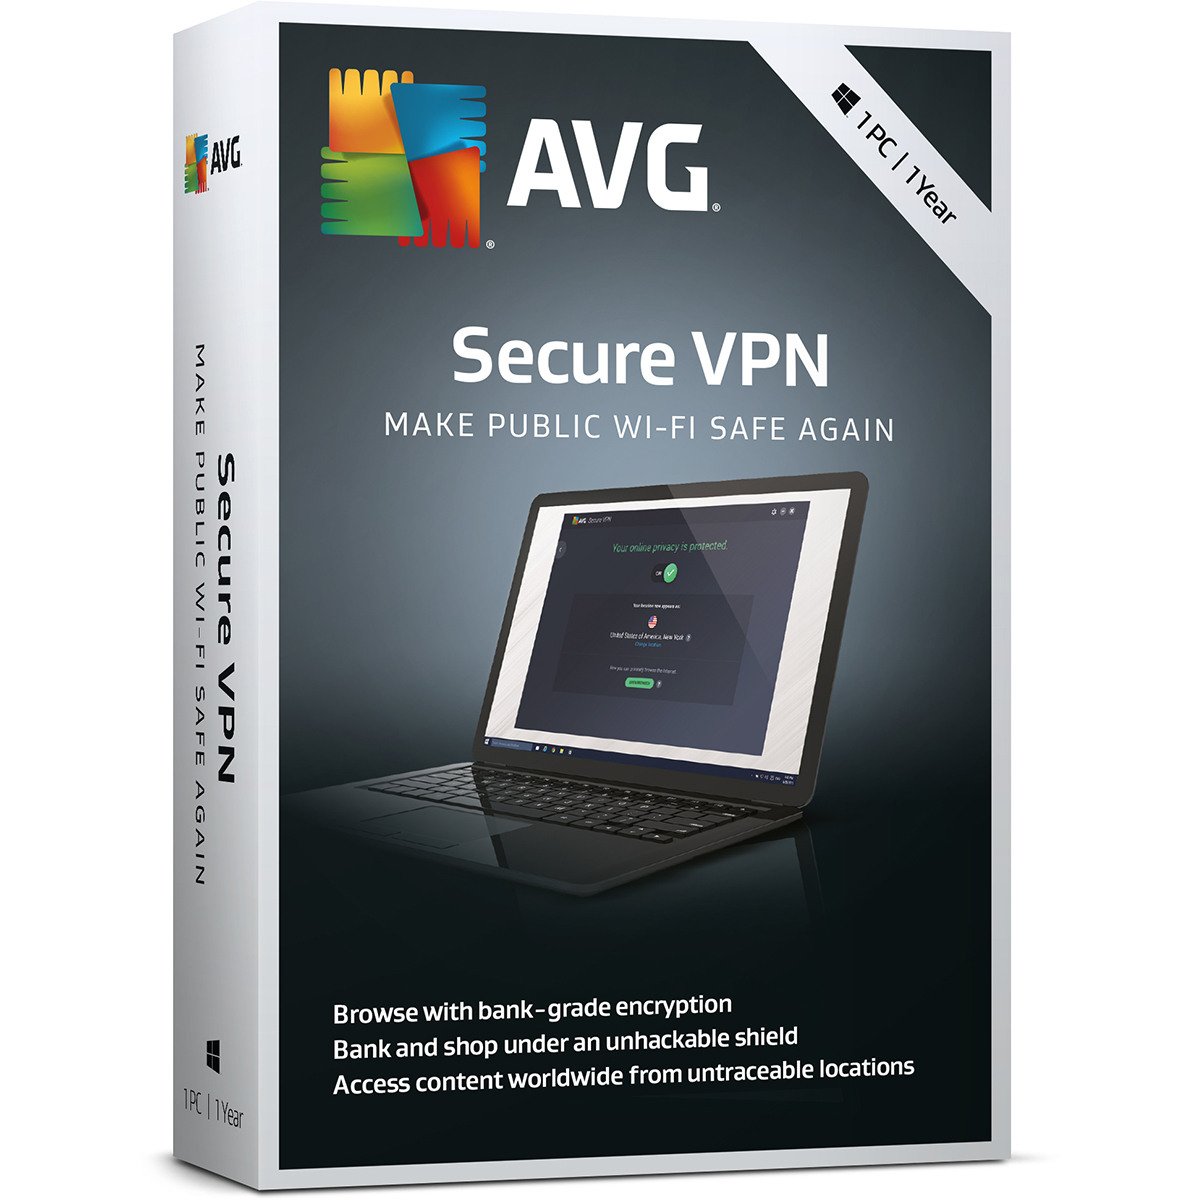 AVG Secure VPN 1 Year License ( 1 Active Connection at a time )